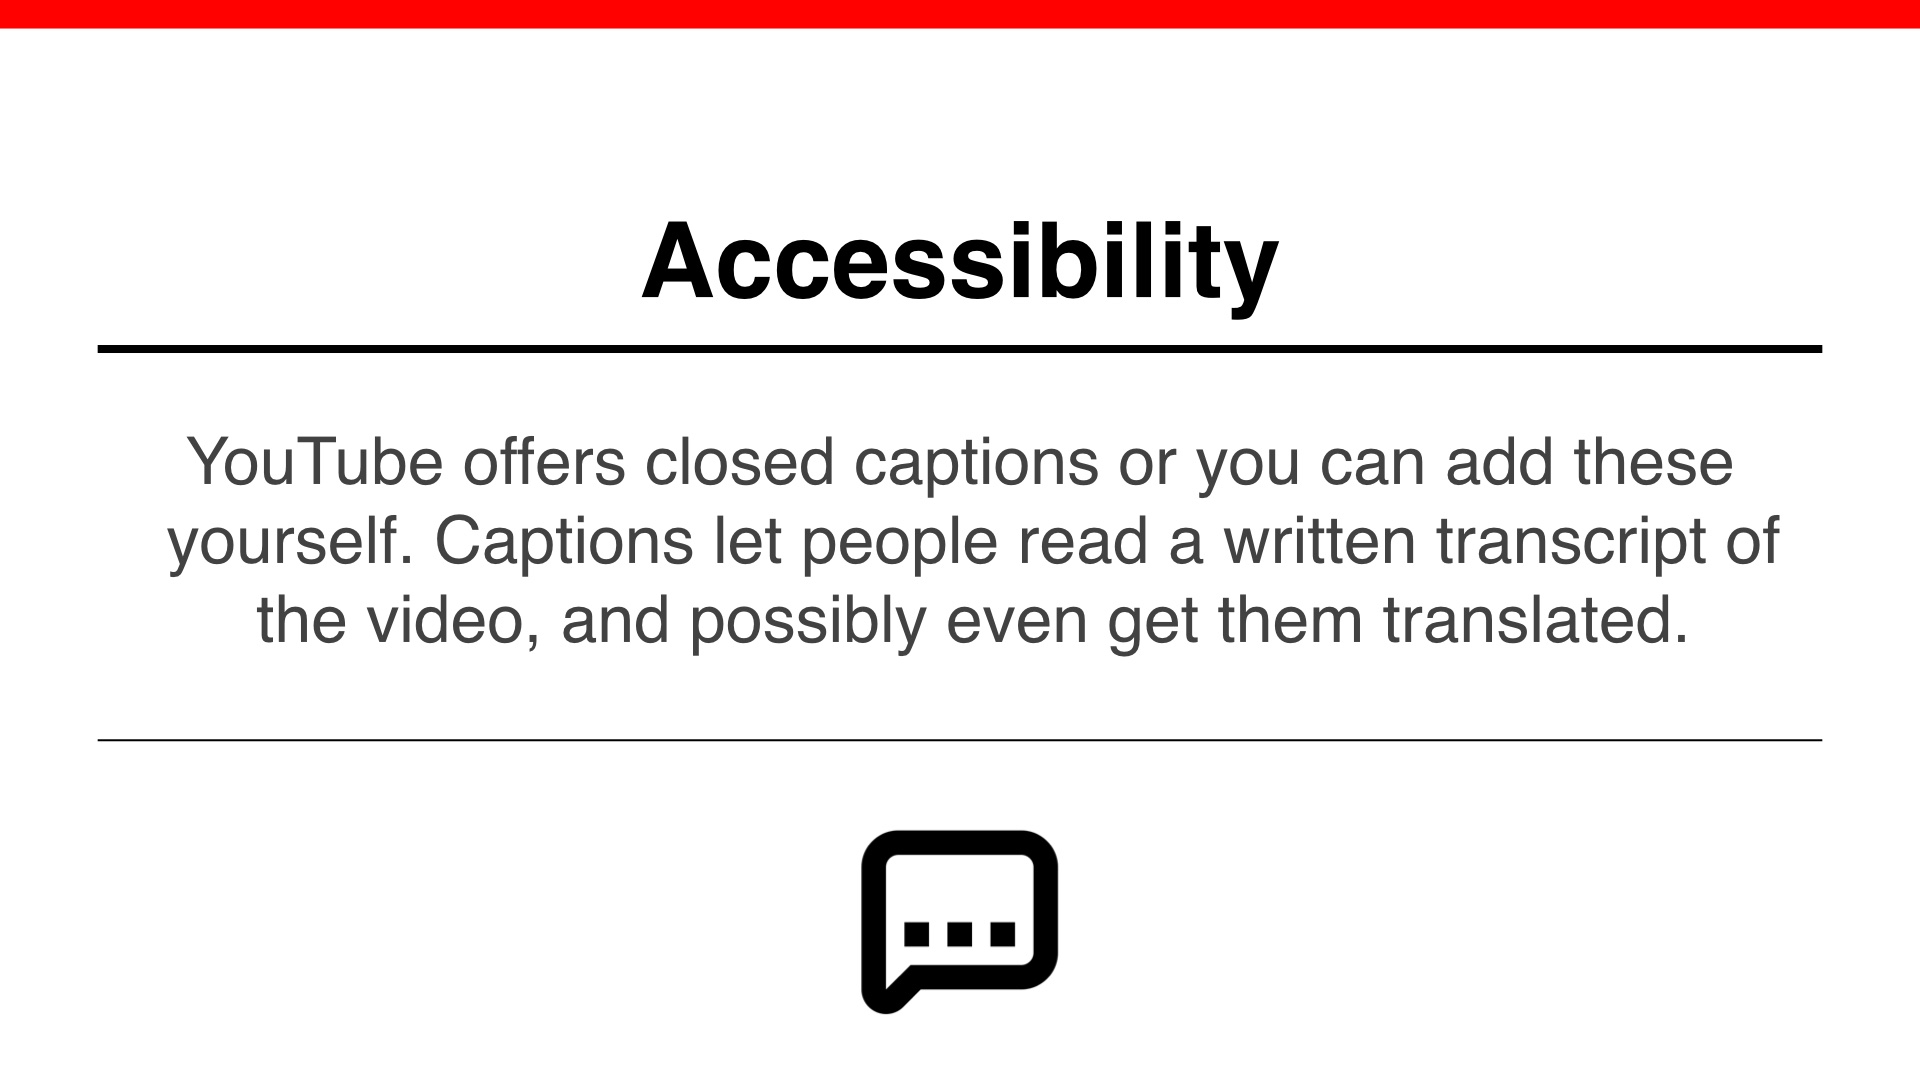 Accessibility: YouTube offers closed captions or you can add these yourself. Captions let people read a written transcript of
the video, and possibly even get them translated.